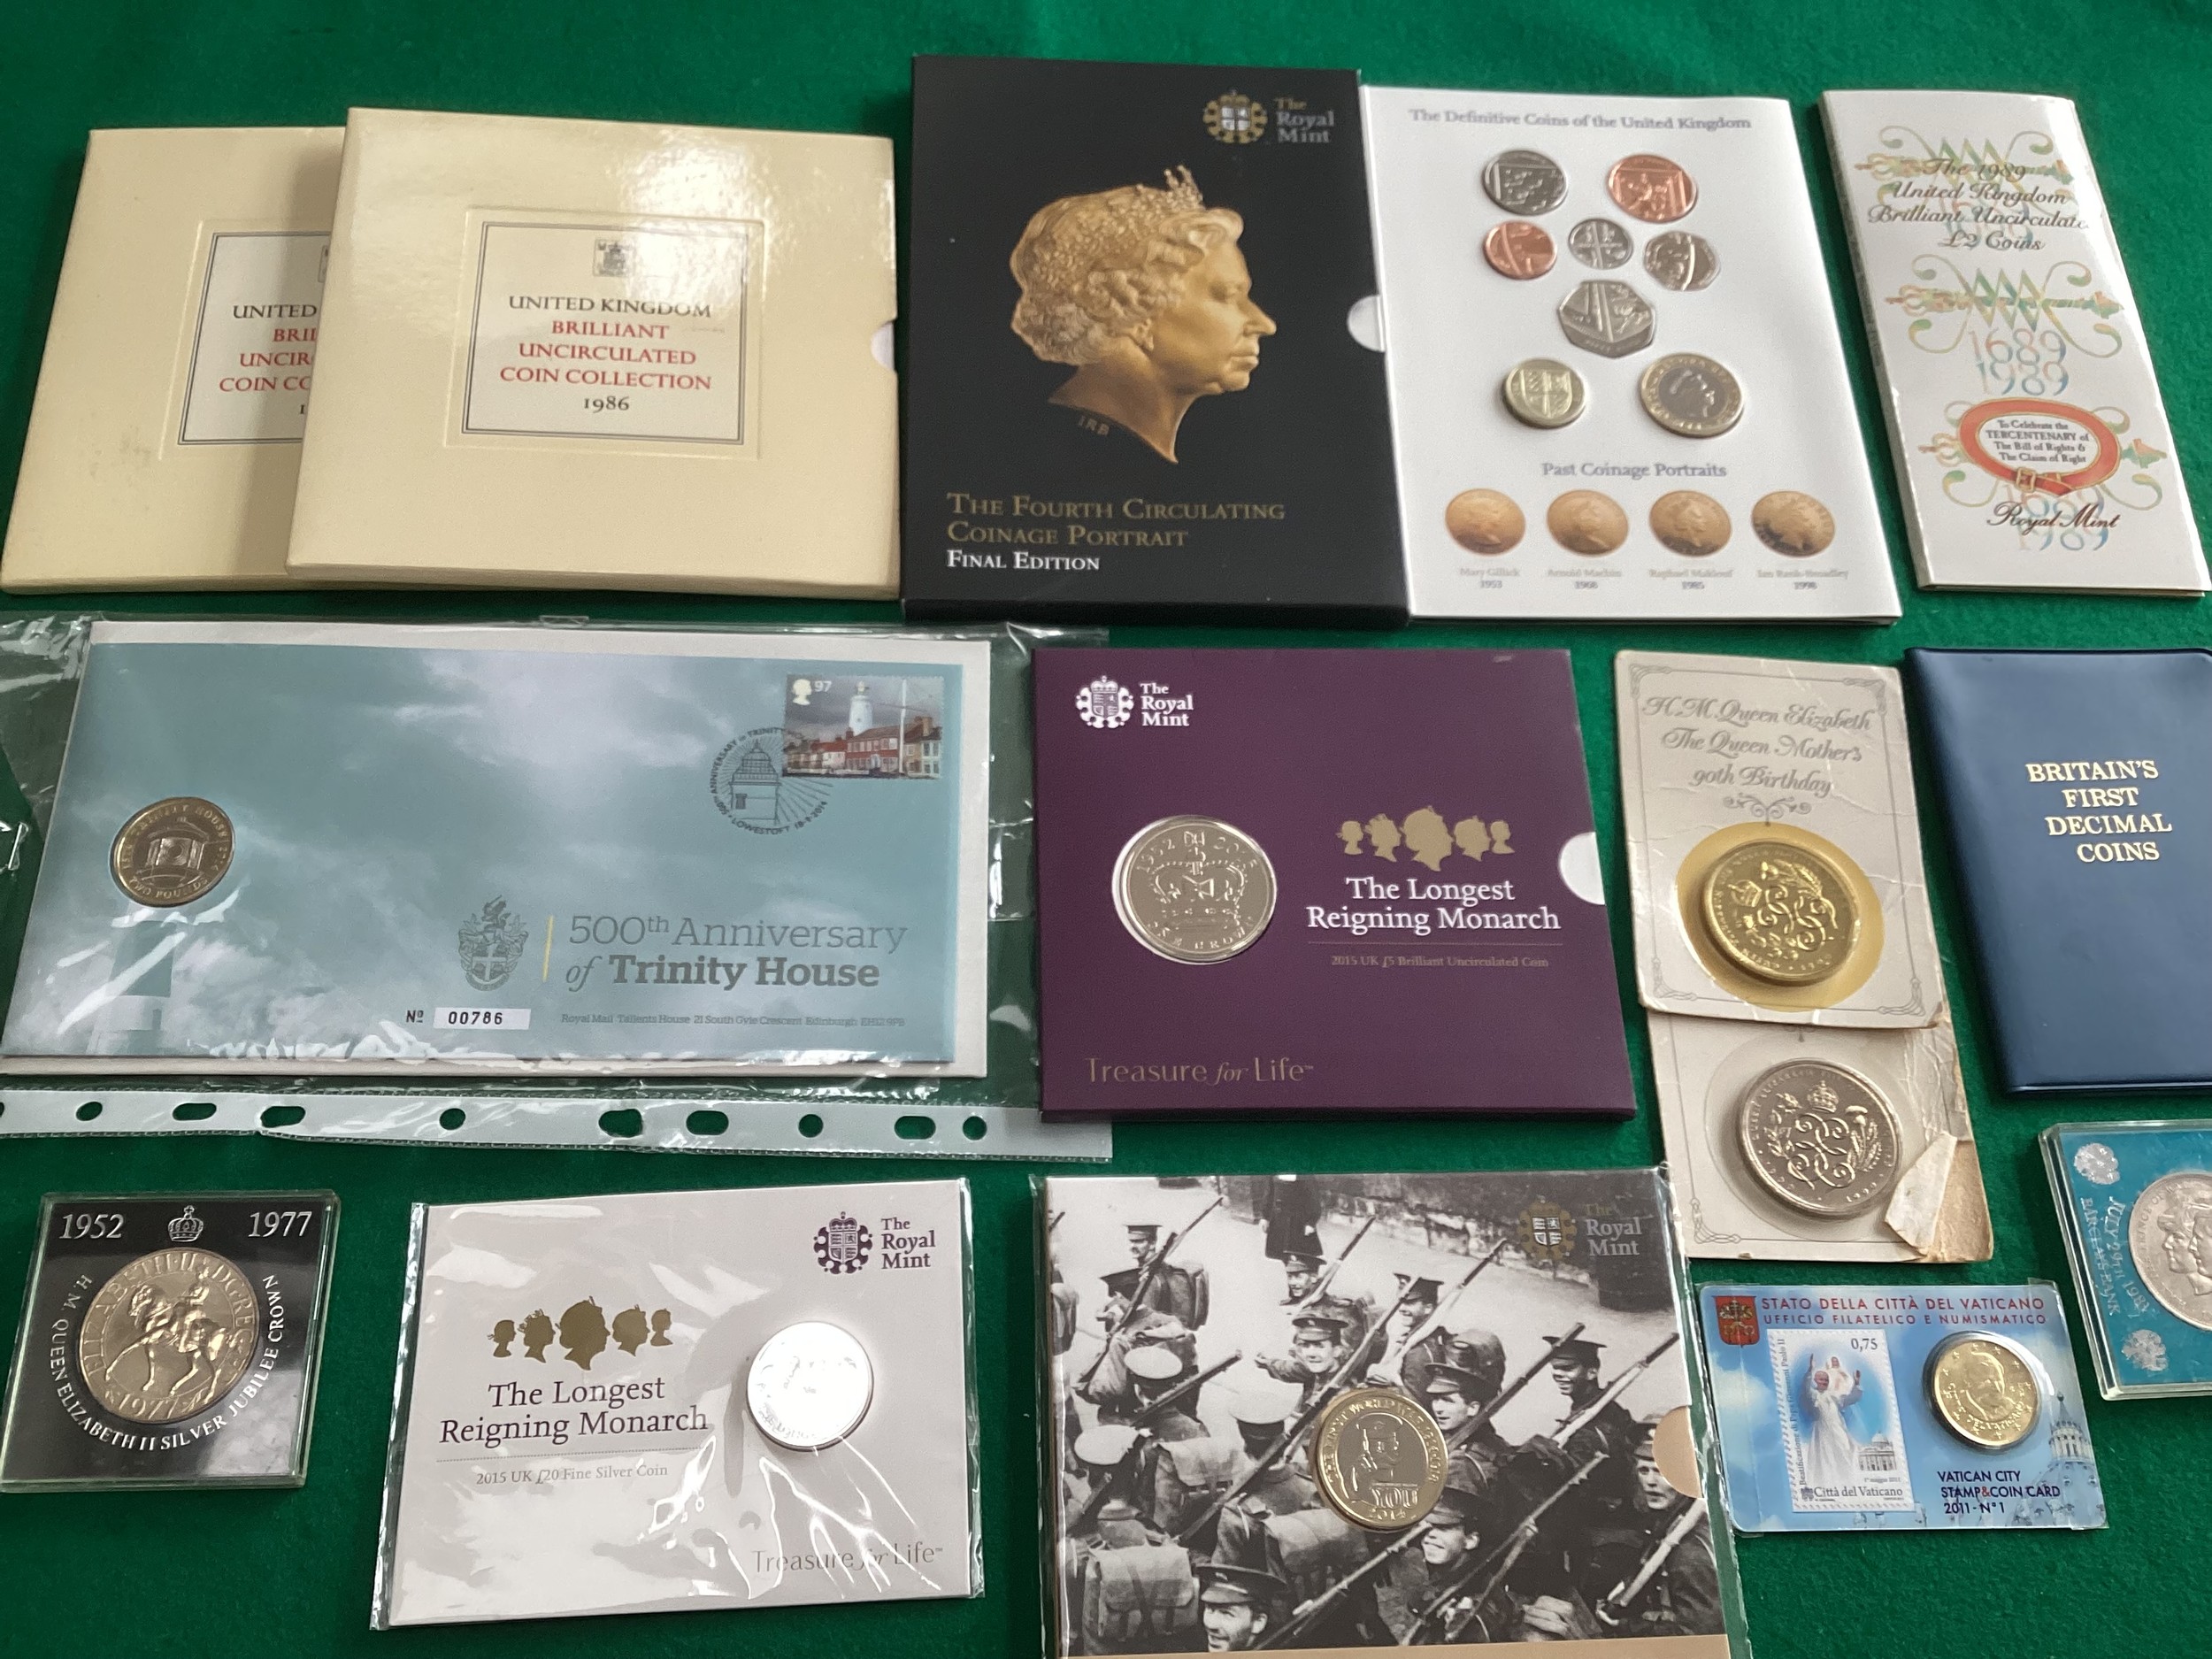 Various coin sets including four Royal Mint BU sets for the years 2019-2022 (2nd photo shows 2019